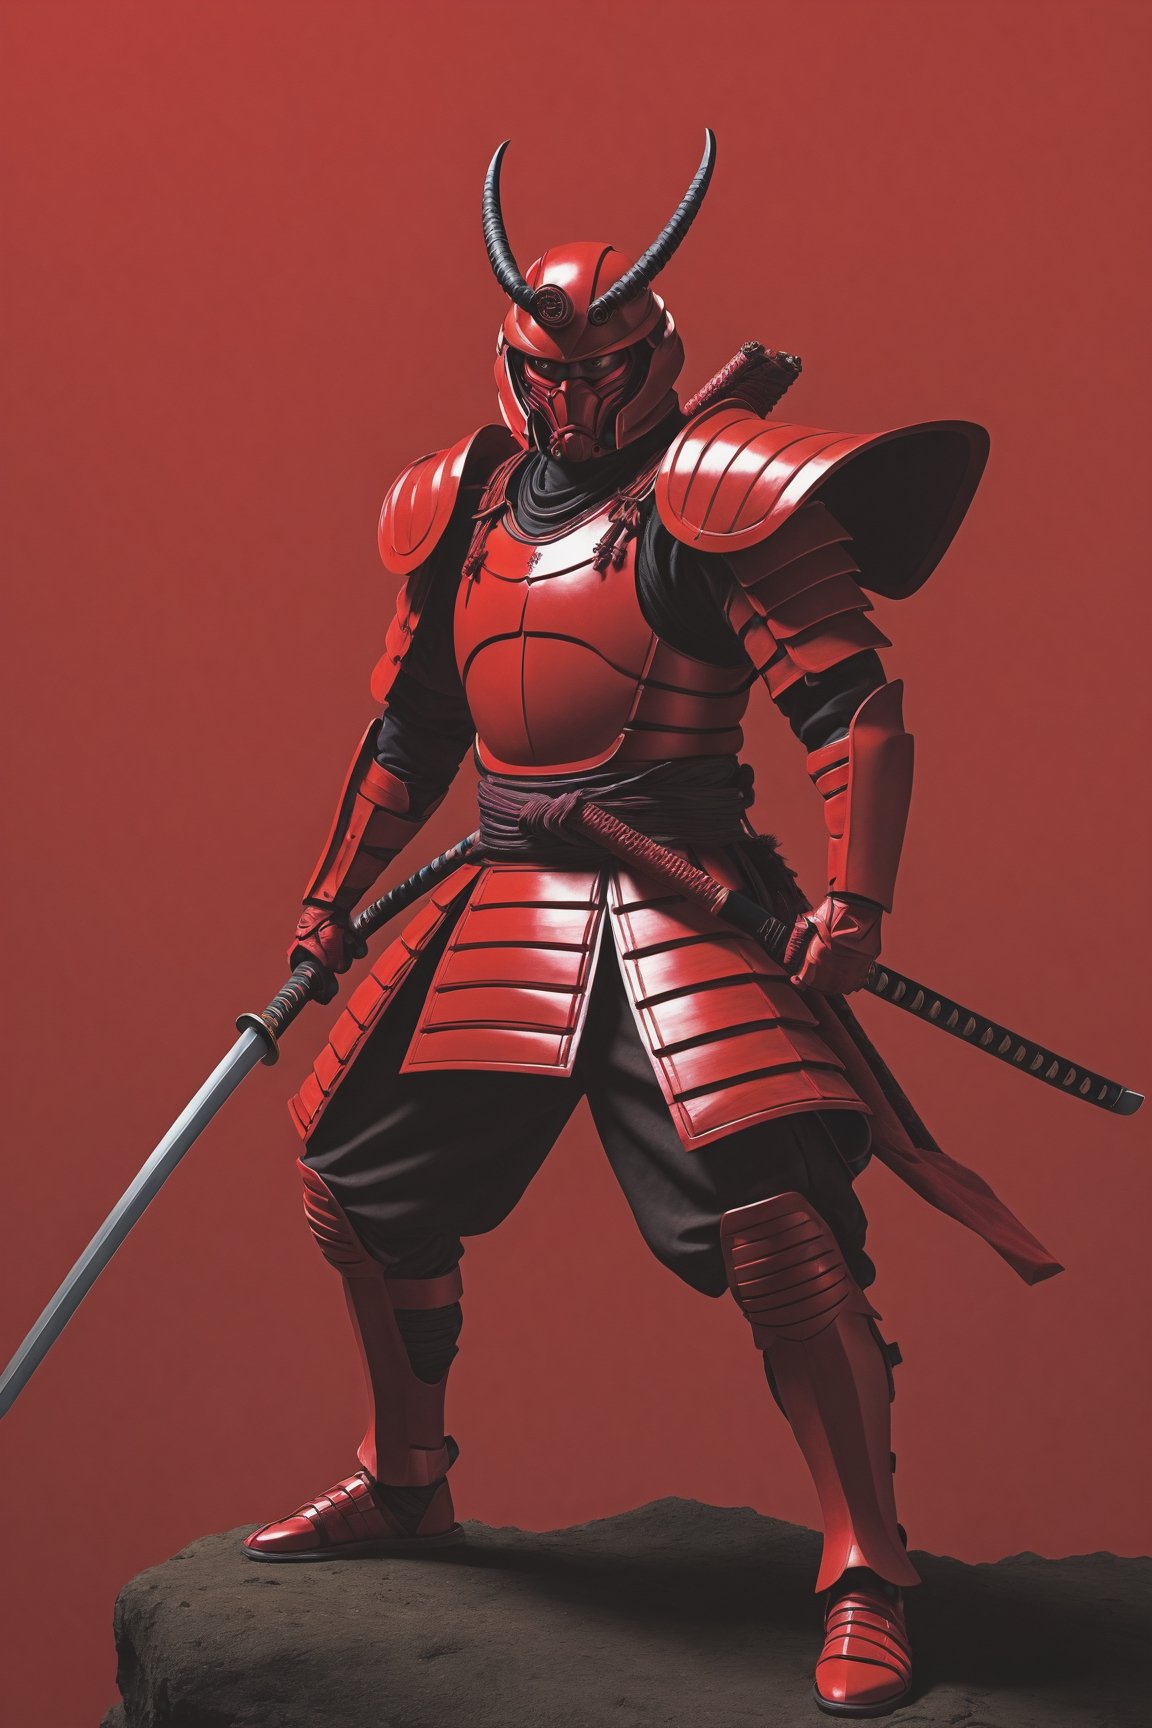 Utlrawide shot Photo realistic image a red samurai with strong body looking like a red hornet, contrasting background,photo r3al